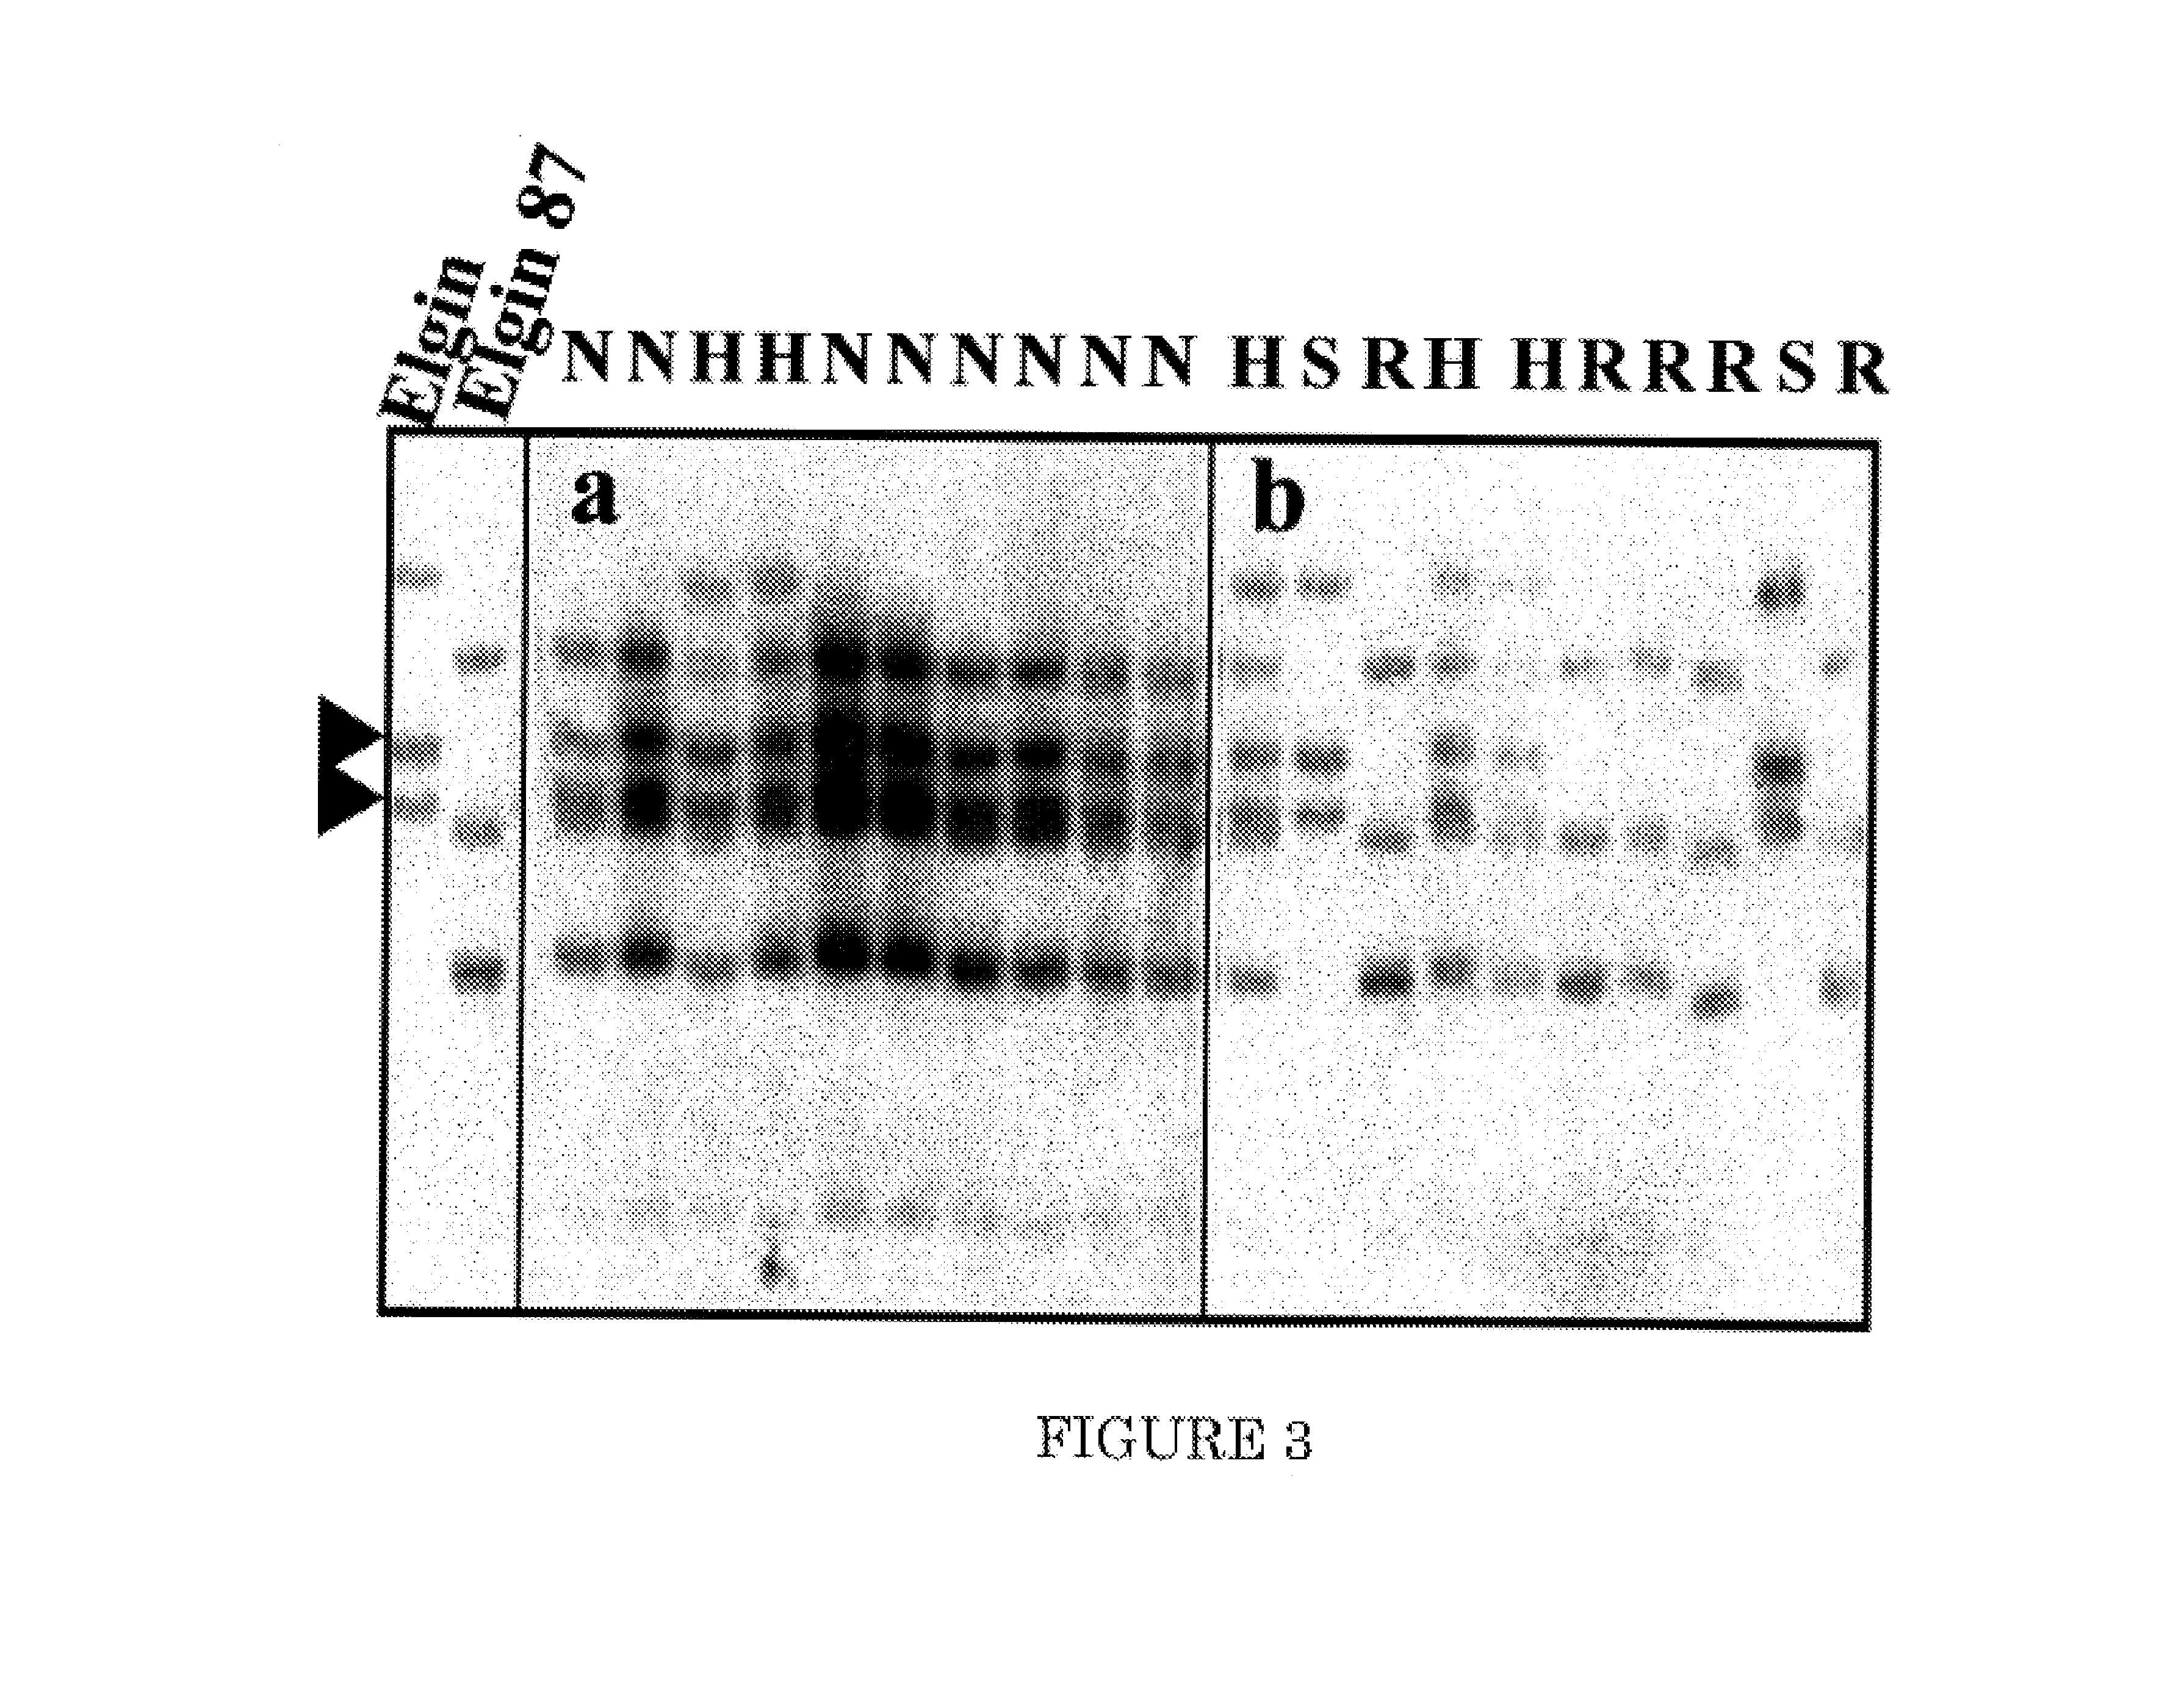 RPSk-1 gene family, nucleotide sequences and uses thereof